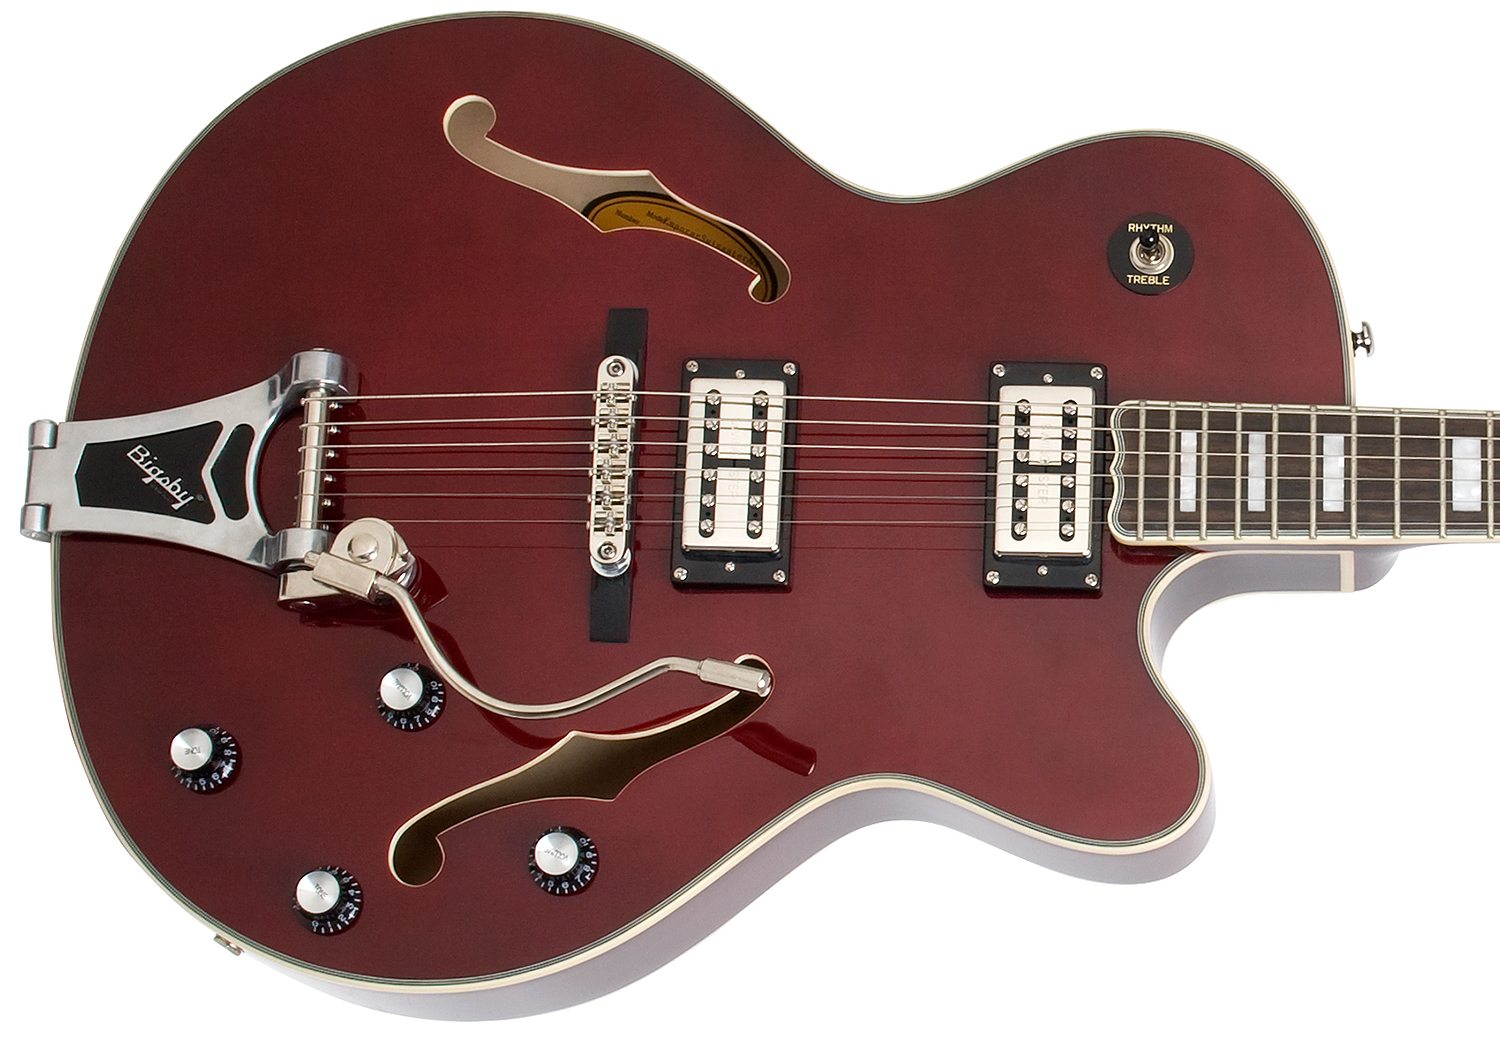 Epiphone Emperor Swingster Bigsby Gh - Wine Red - Guitare Électrique 3/4 Caisse & Jazz - Variation 1